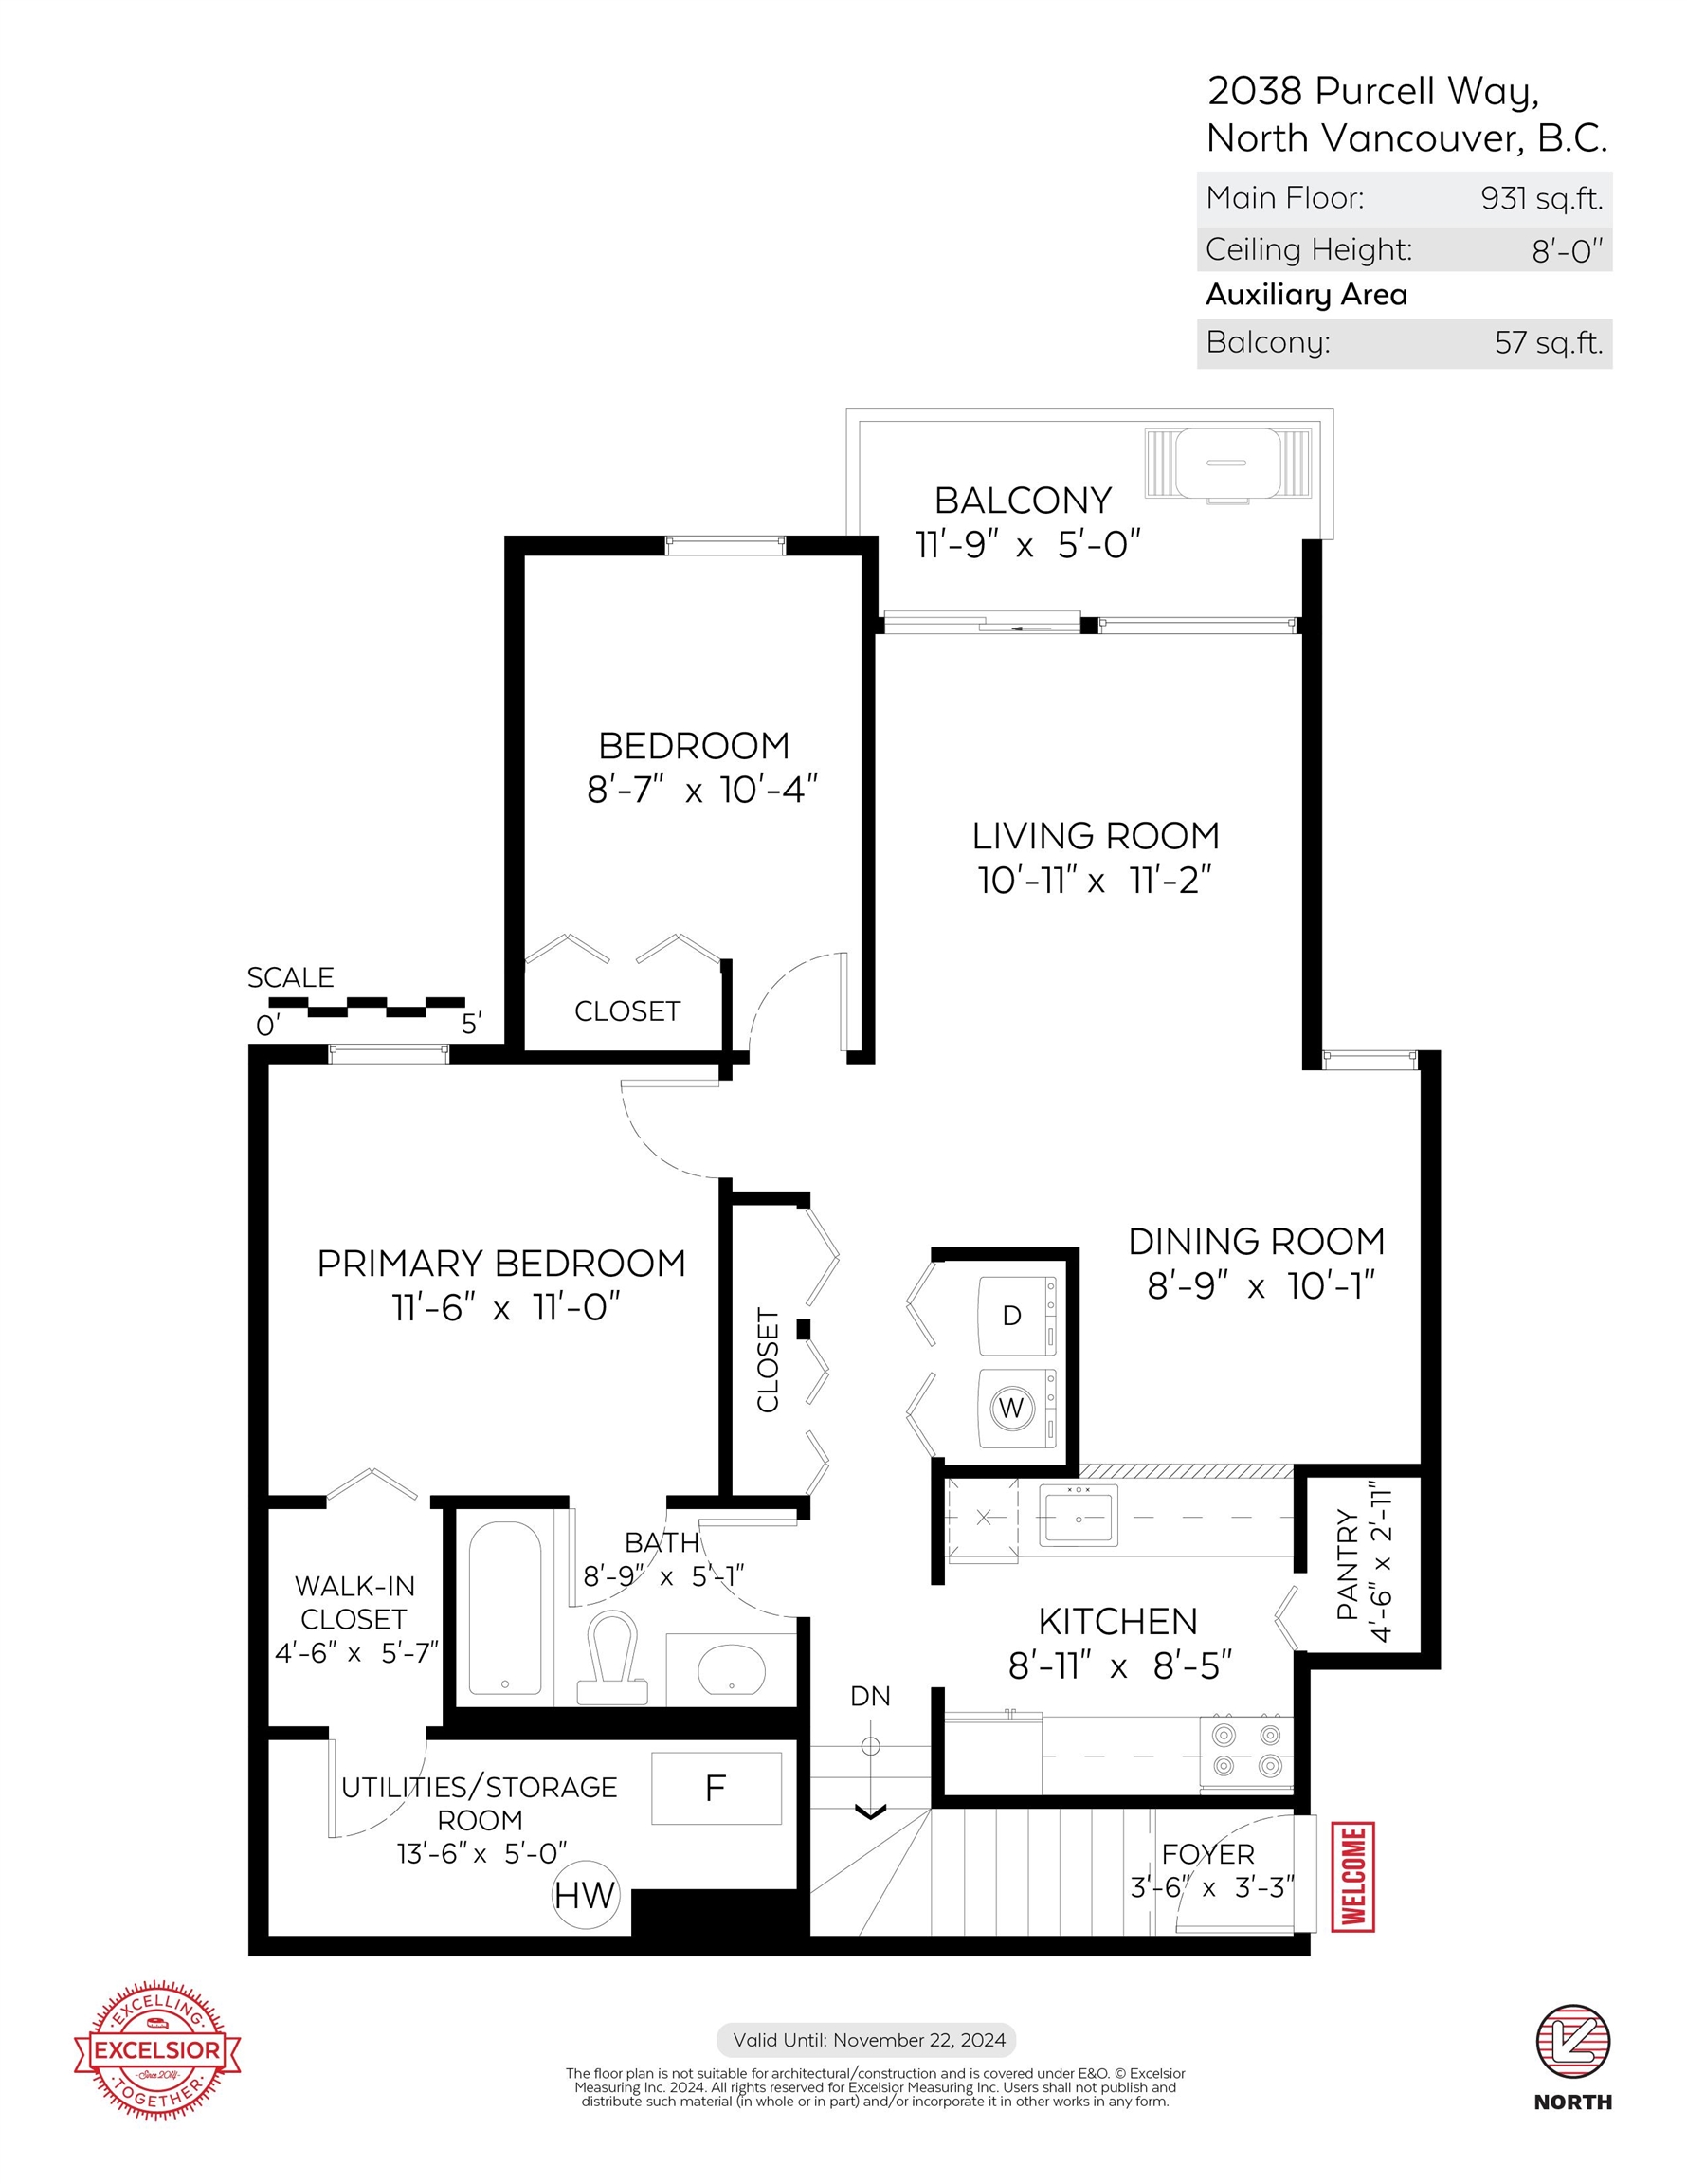 Listing image of 2038 PURCELL WAY